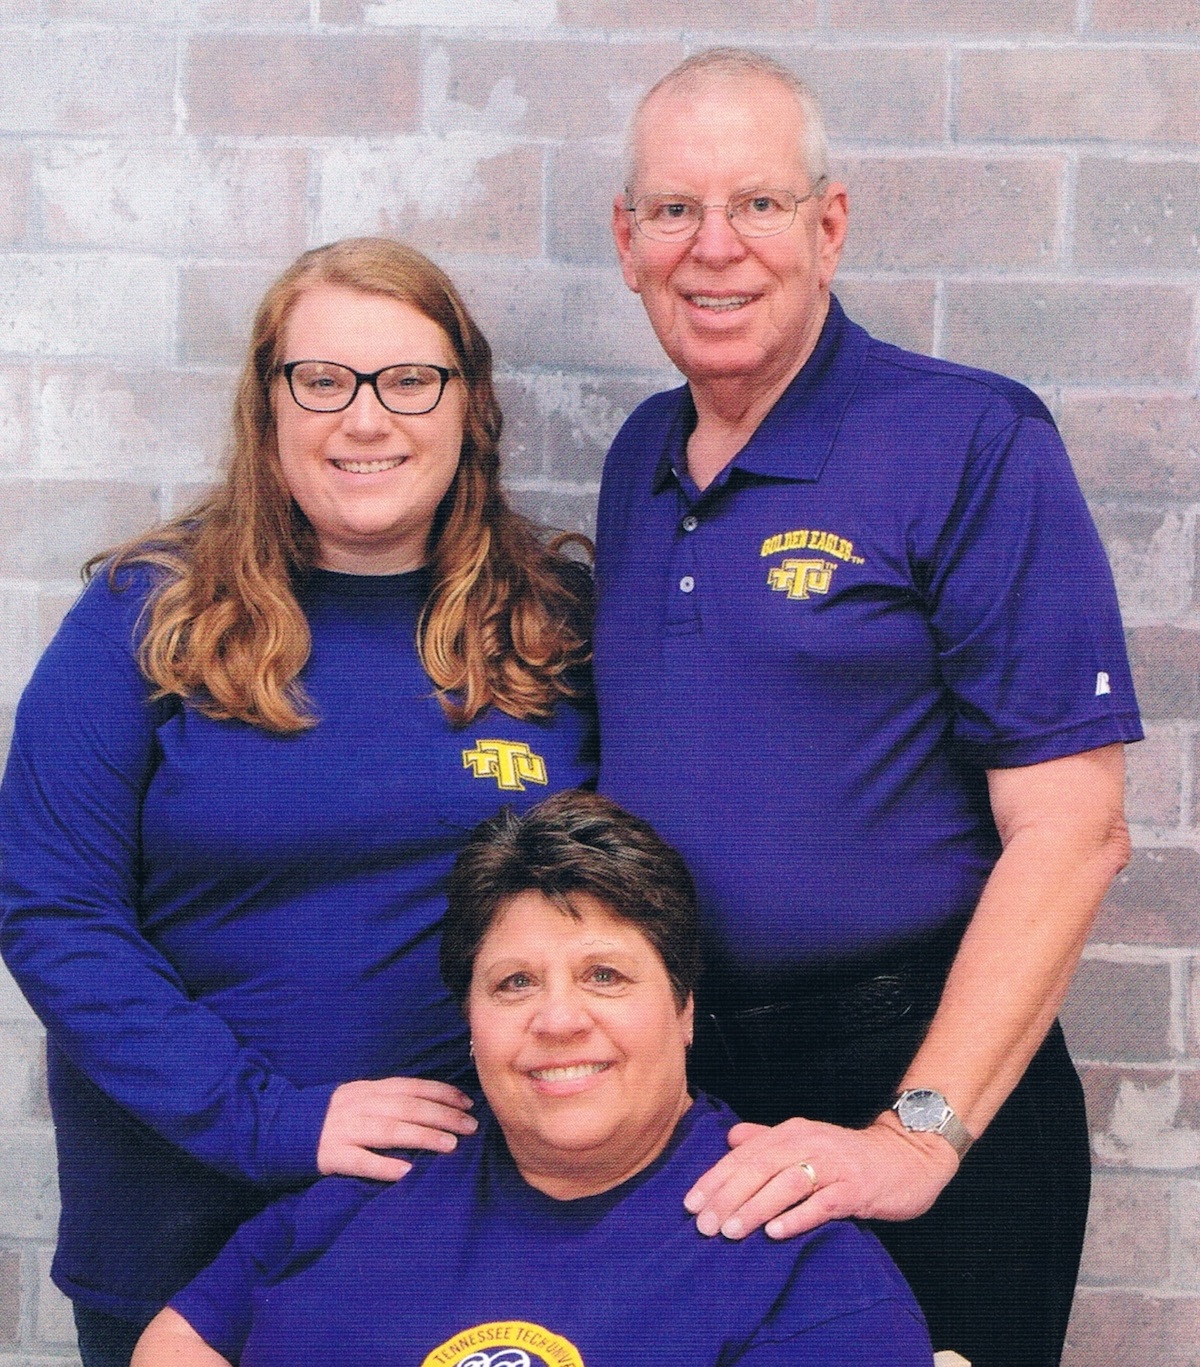 The Brooks family in Tennessee Tech shirts